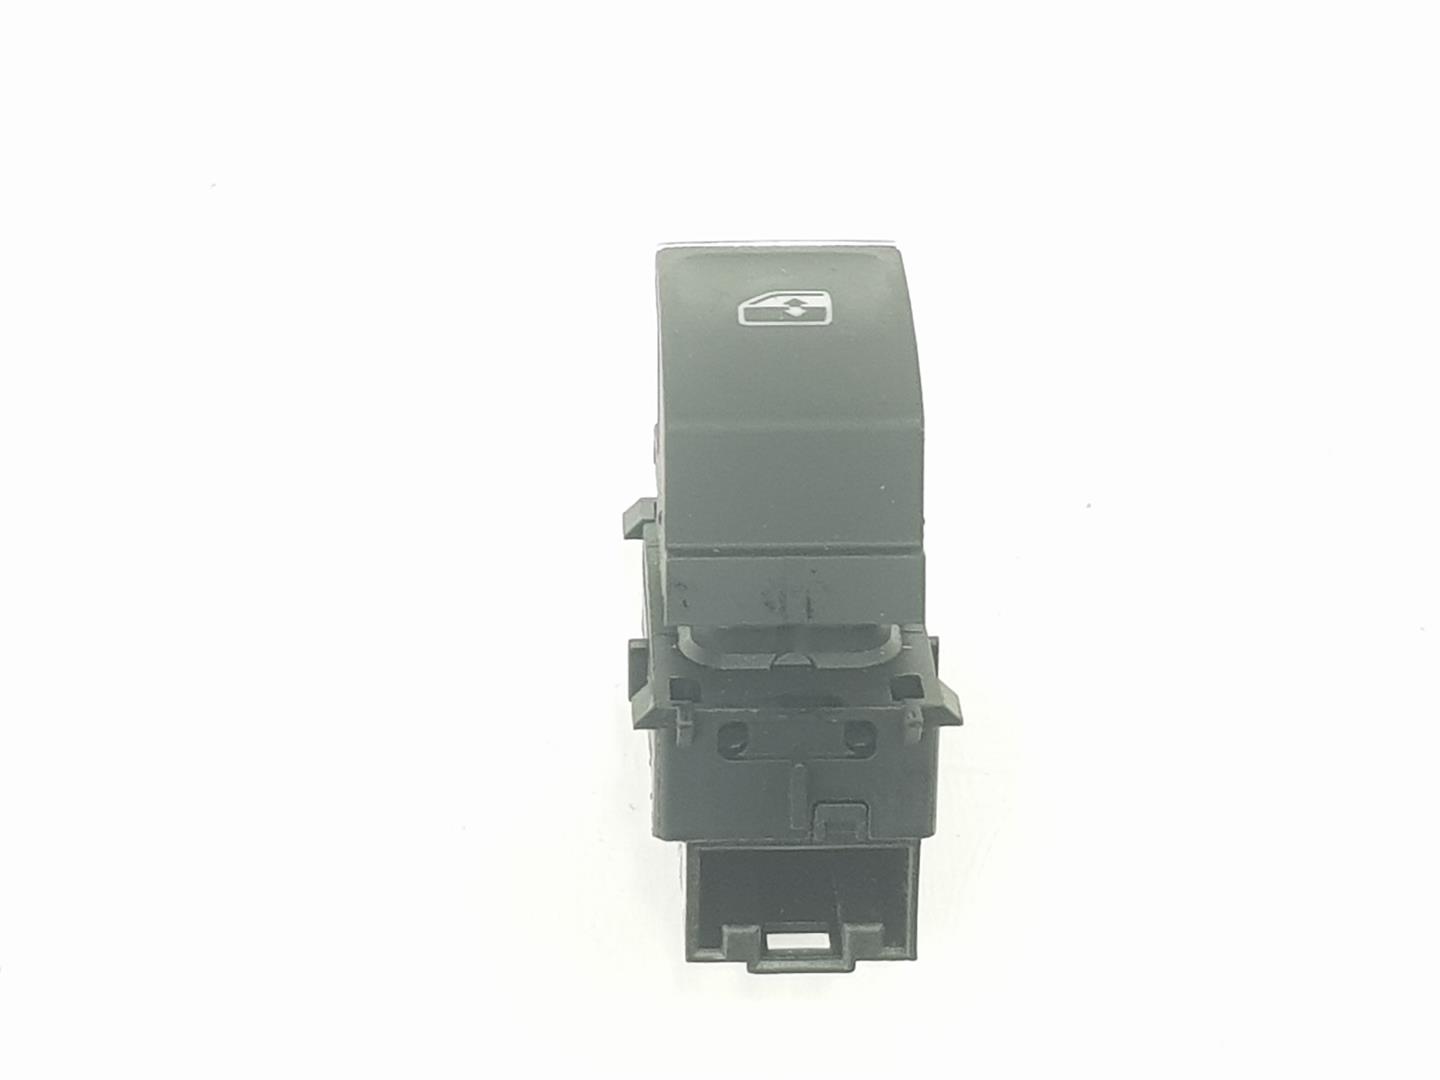 SEAT Alhambra 2 generation (2010-2021) Front Right Door Window Switch 5G0959855N, 5G0959855N 23748908